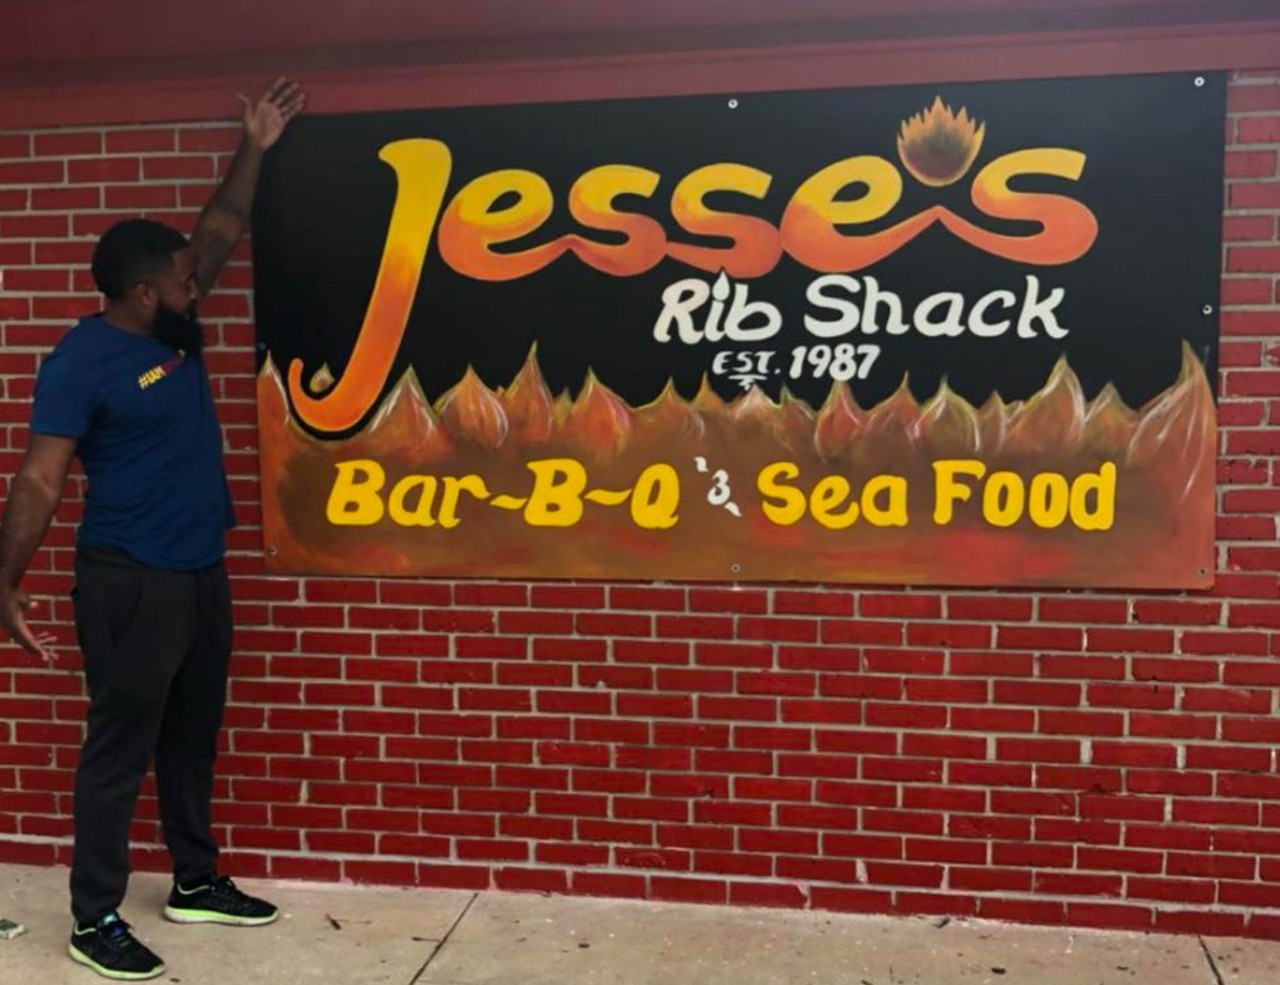 Jesse's Rib Shack
2202 W. Pine St., Orlando
Jesse's Rib Shack serves barbecue favorites, seafood and Southern-style sides Wednesday through Saturday until they run out.